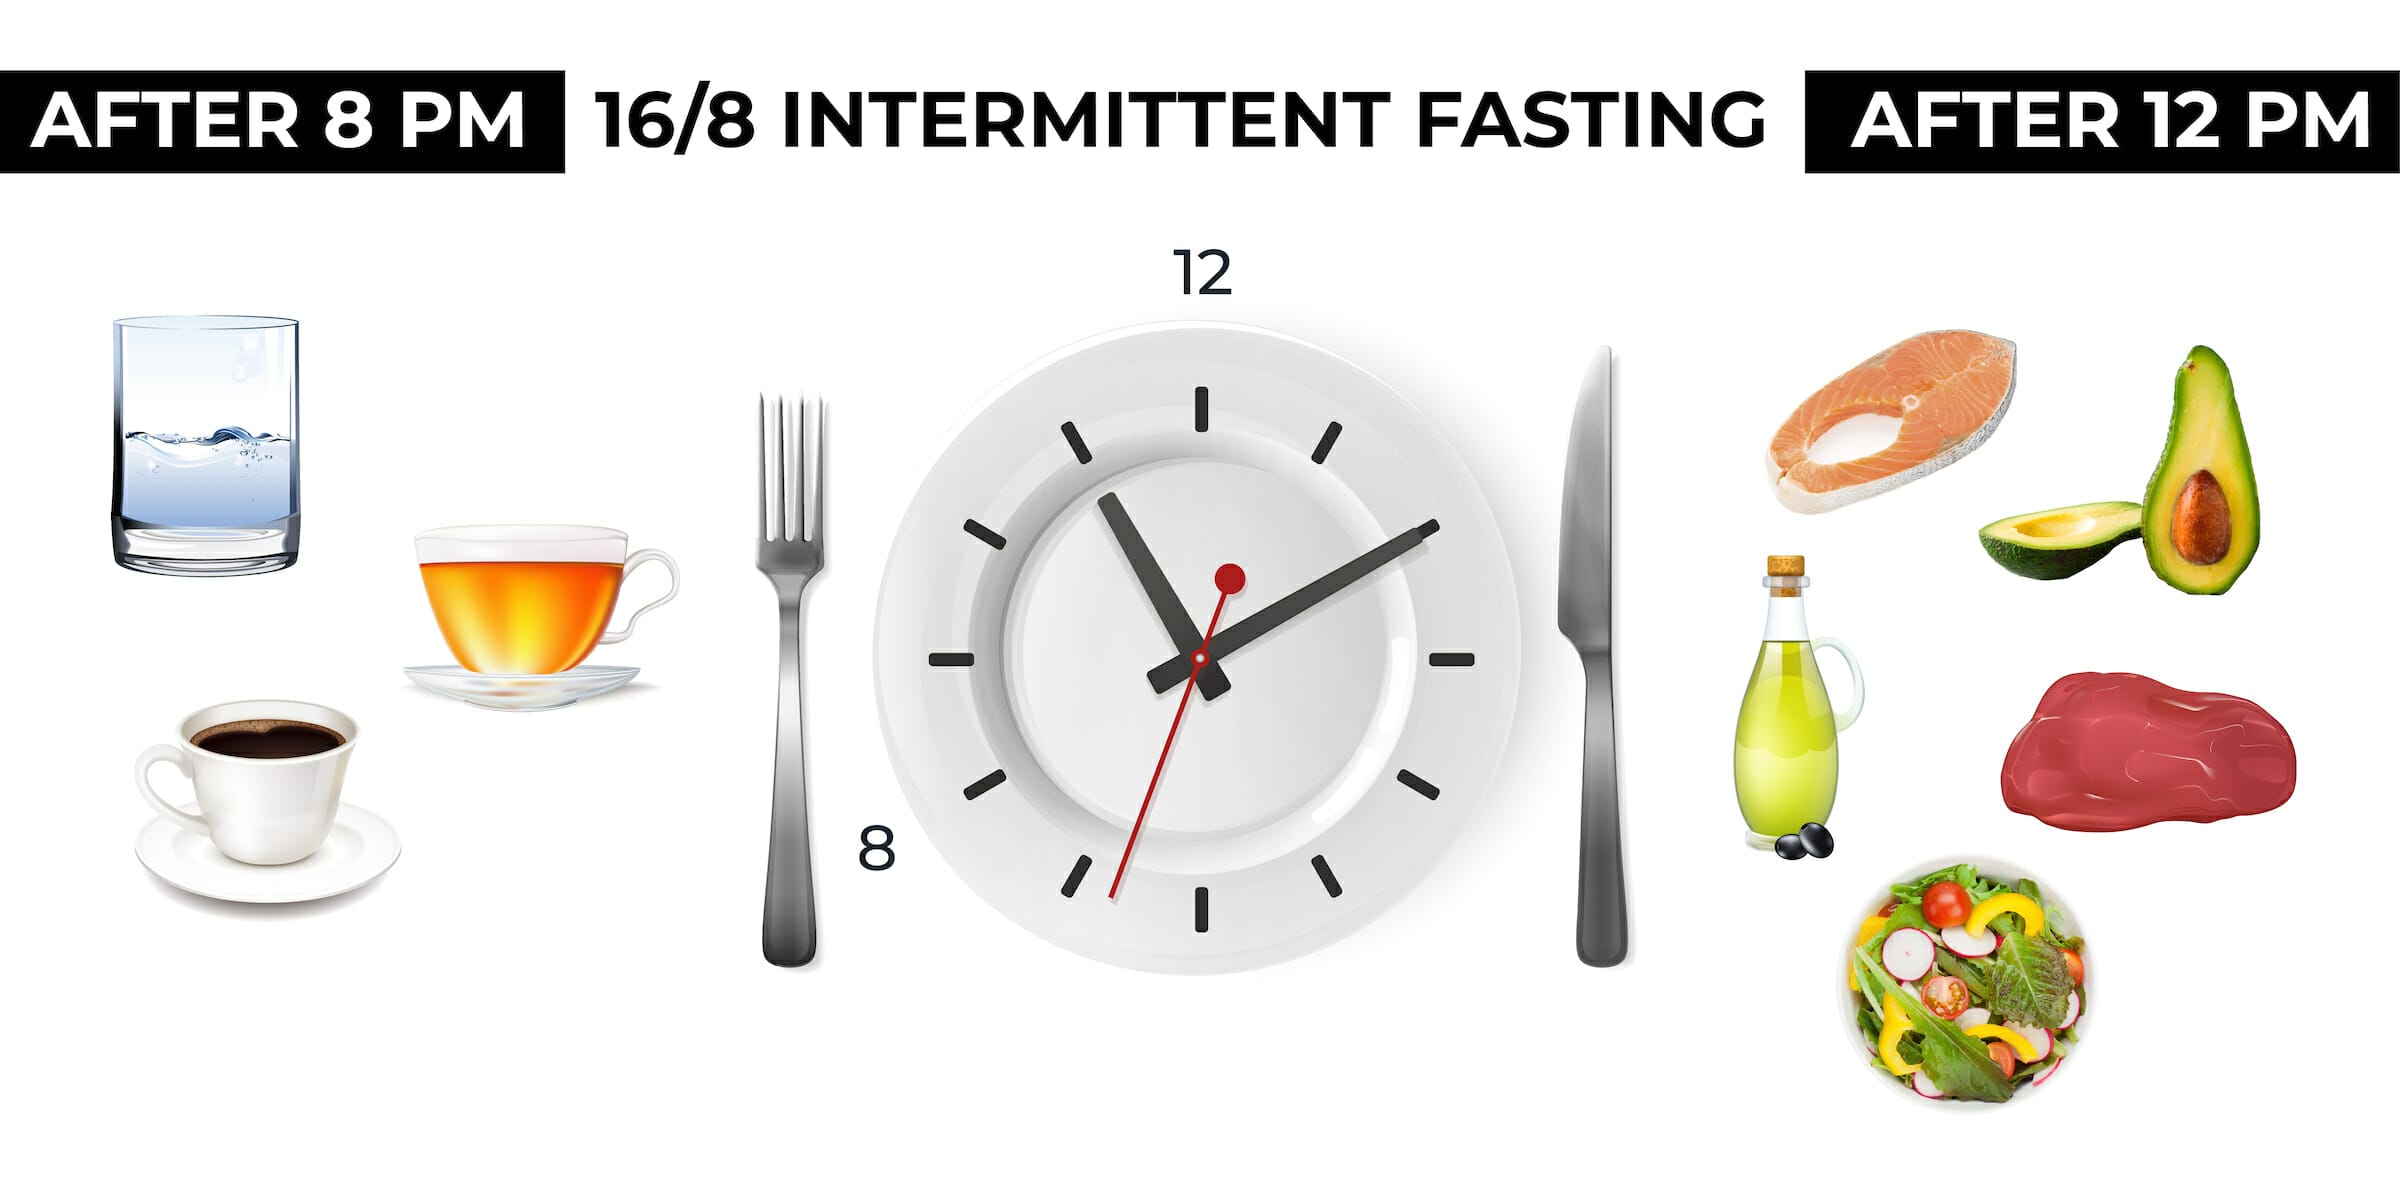 Intermittent fasting has been a natural part of human evolution for millions of years.